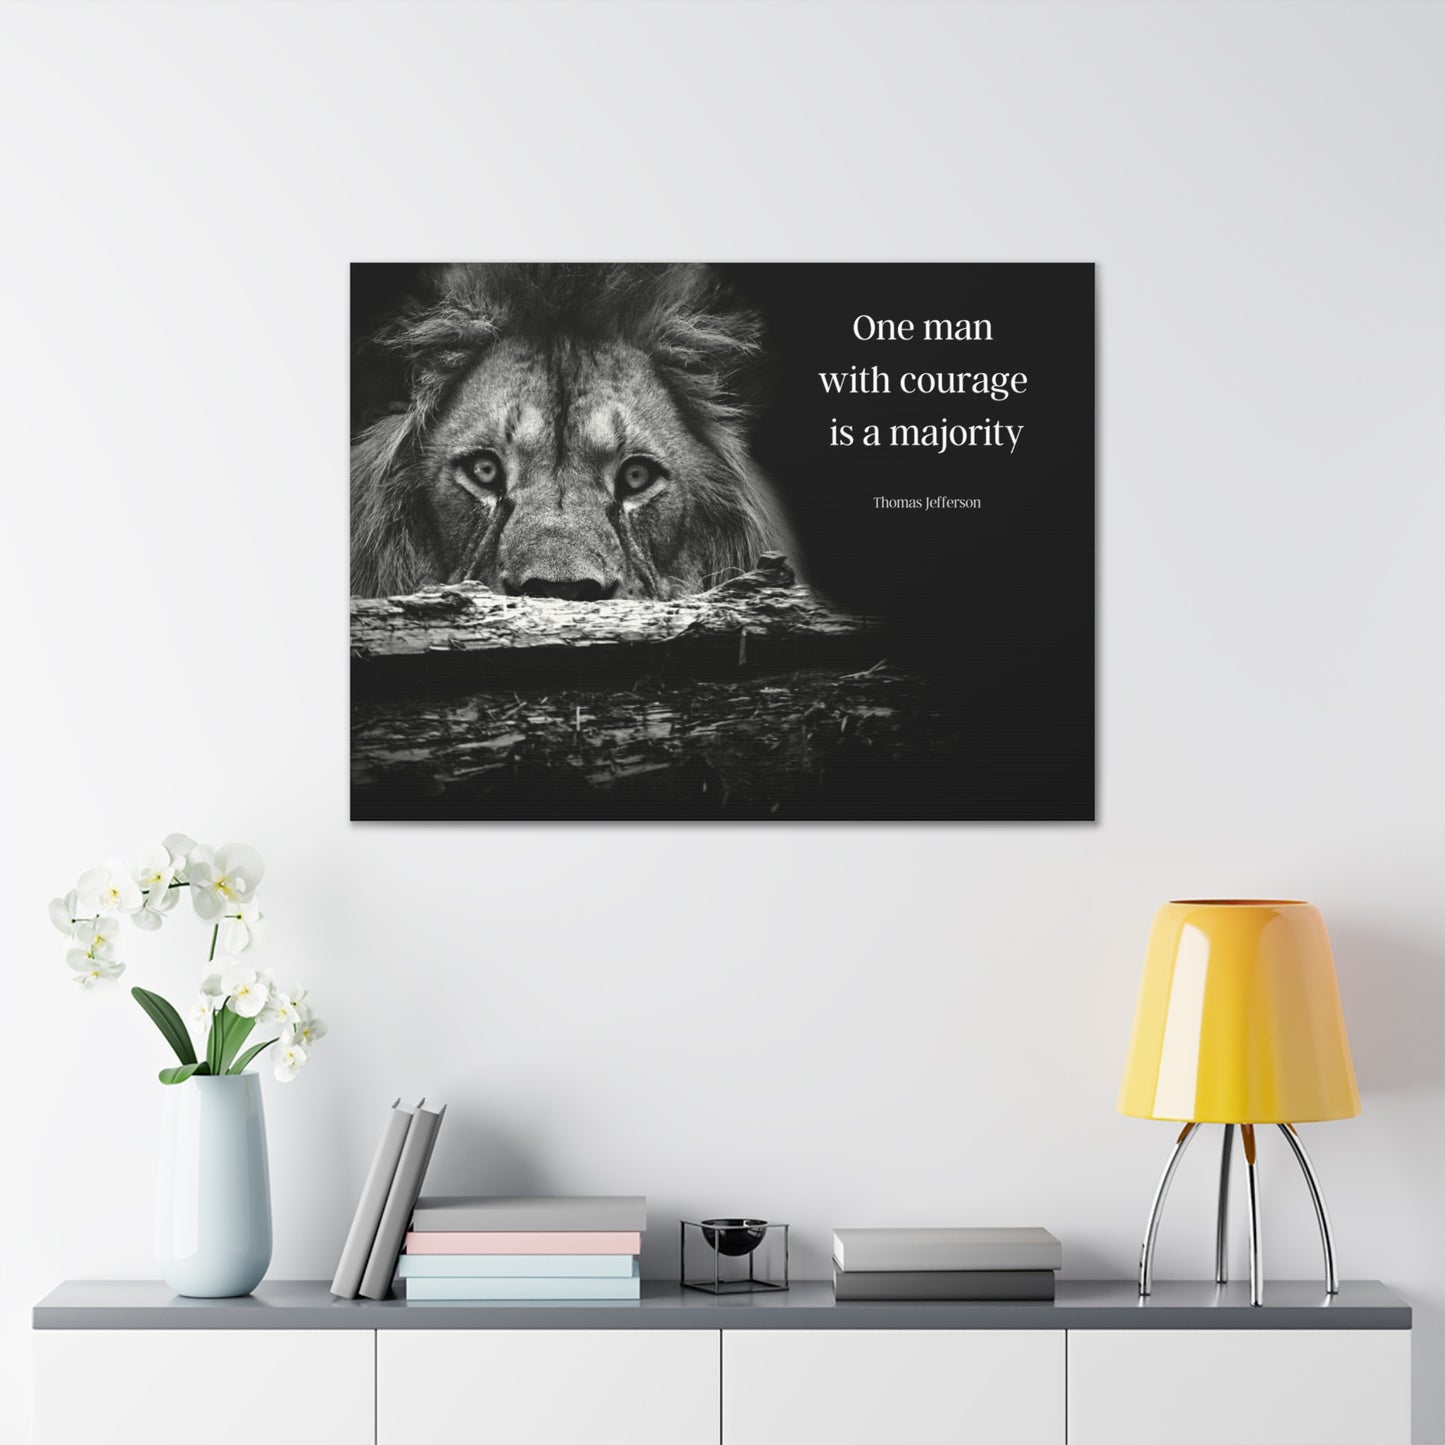 Thomas Jefferson Quote 4, Canvas Art, Horizontal Print, Lion, Courage, 3rd President of the United States, American Patriots, AI Art, Political Art, Canvas Prints, Presidential Quotes, Inspirational Quotes